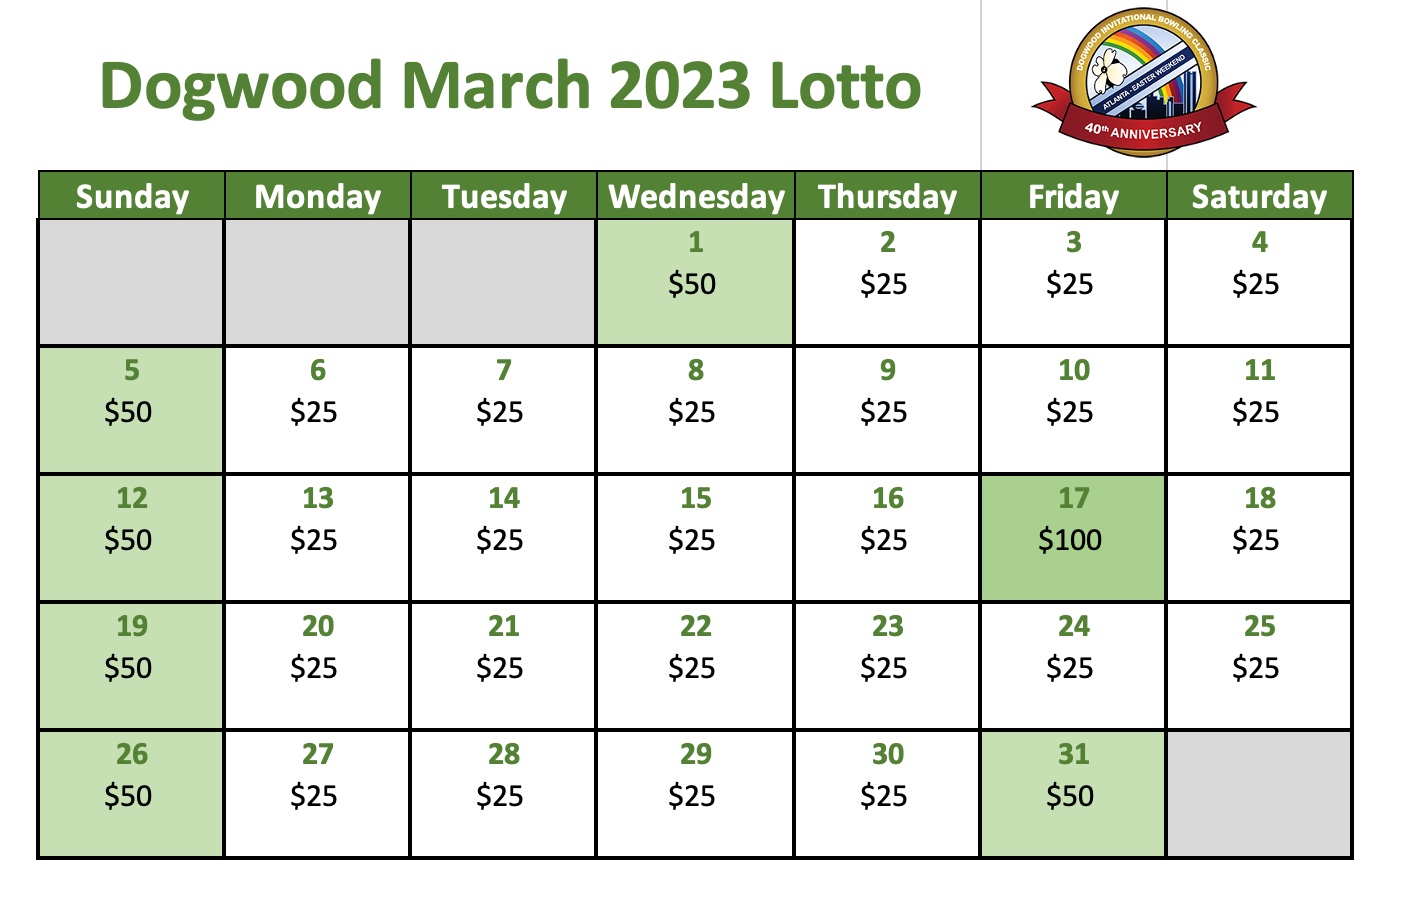 March is Dogwood LUCKY LOTTO Month Dogwood Invitational Bowling Classic